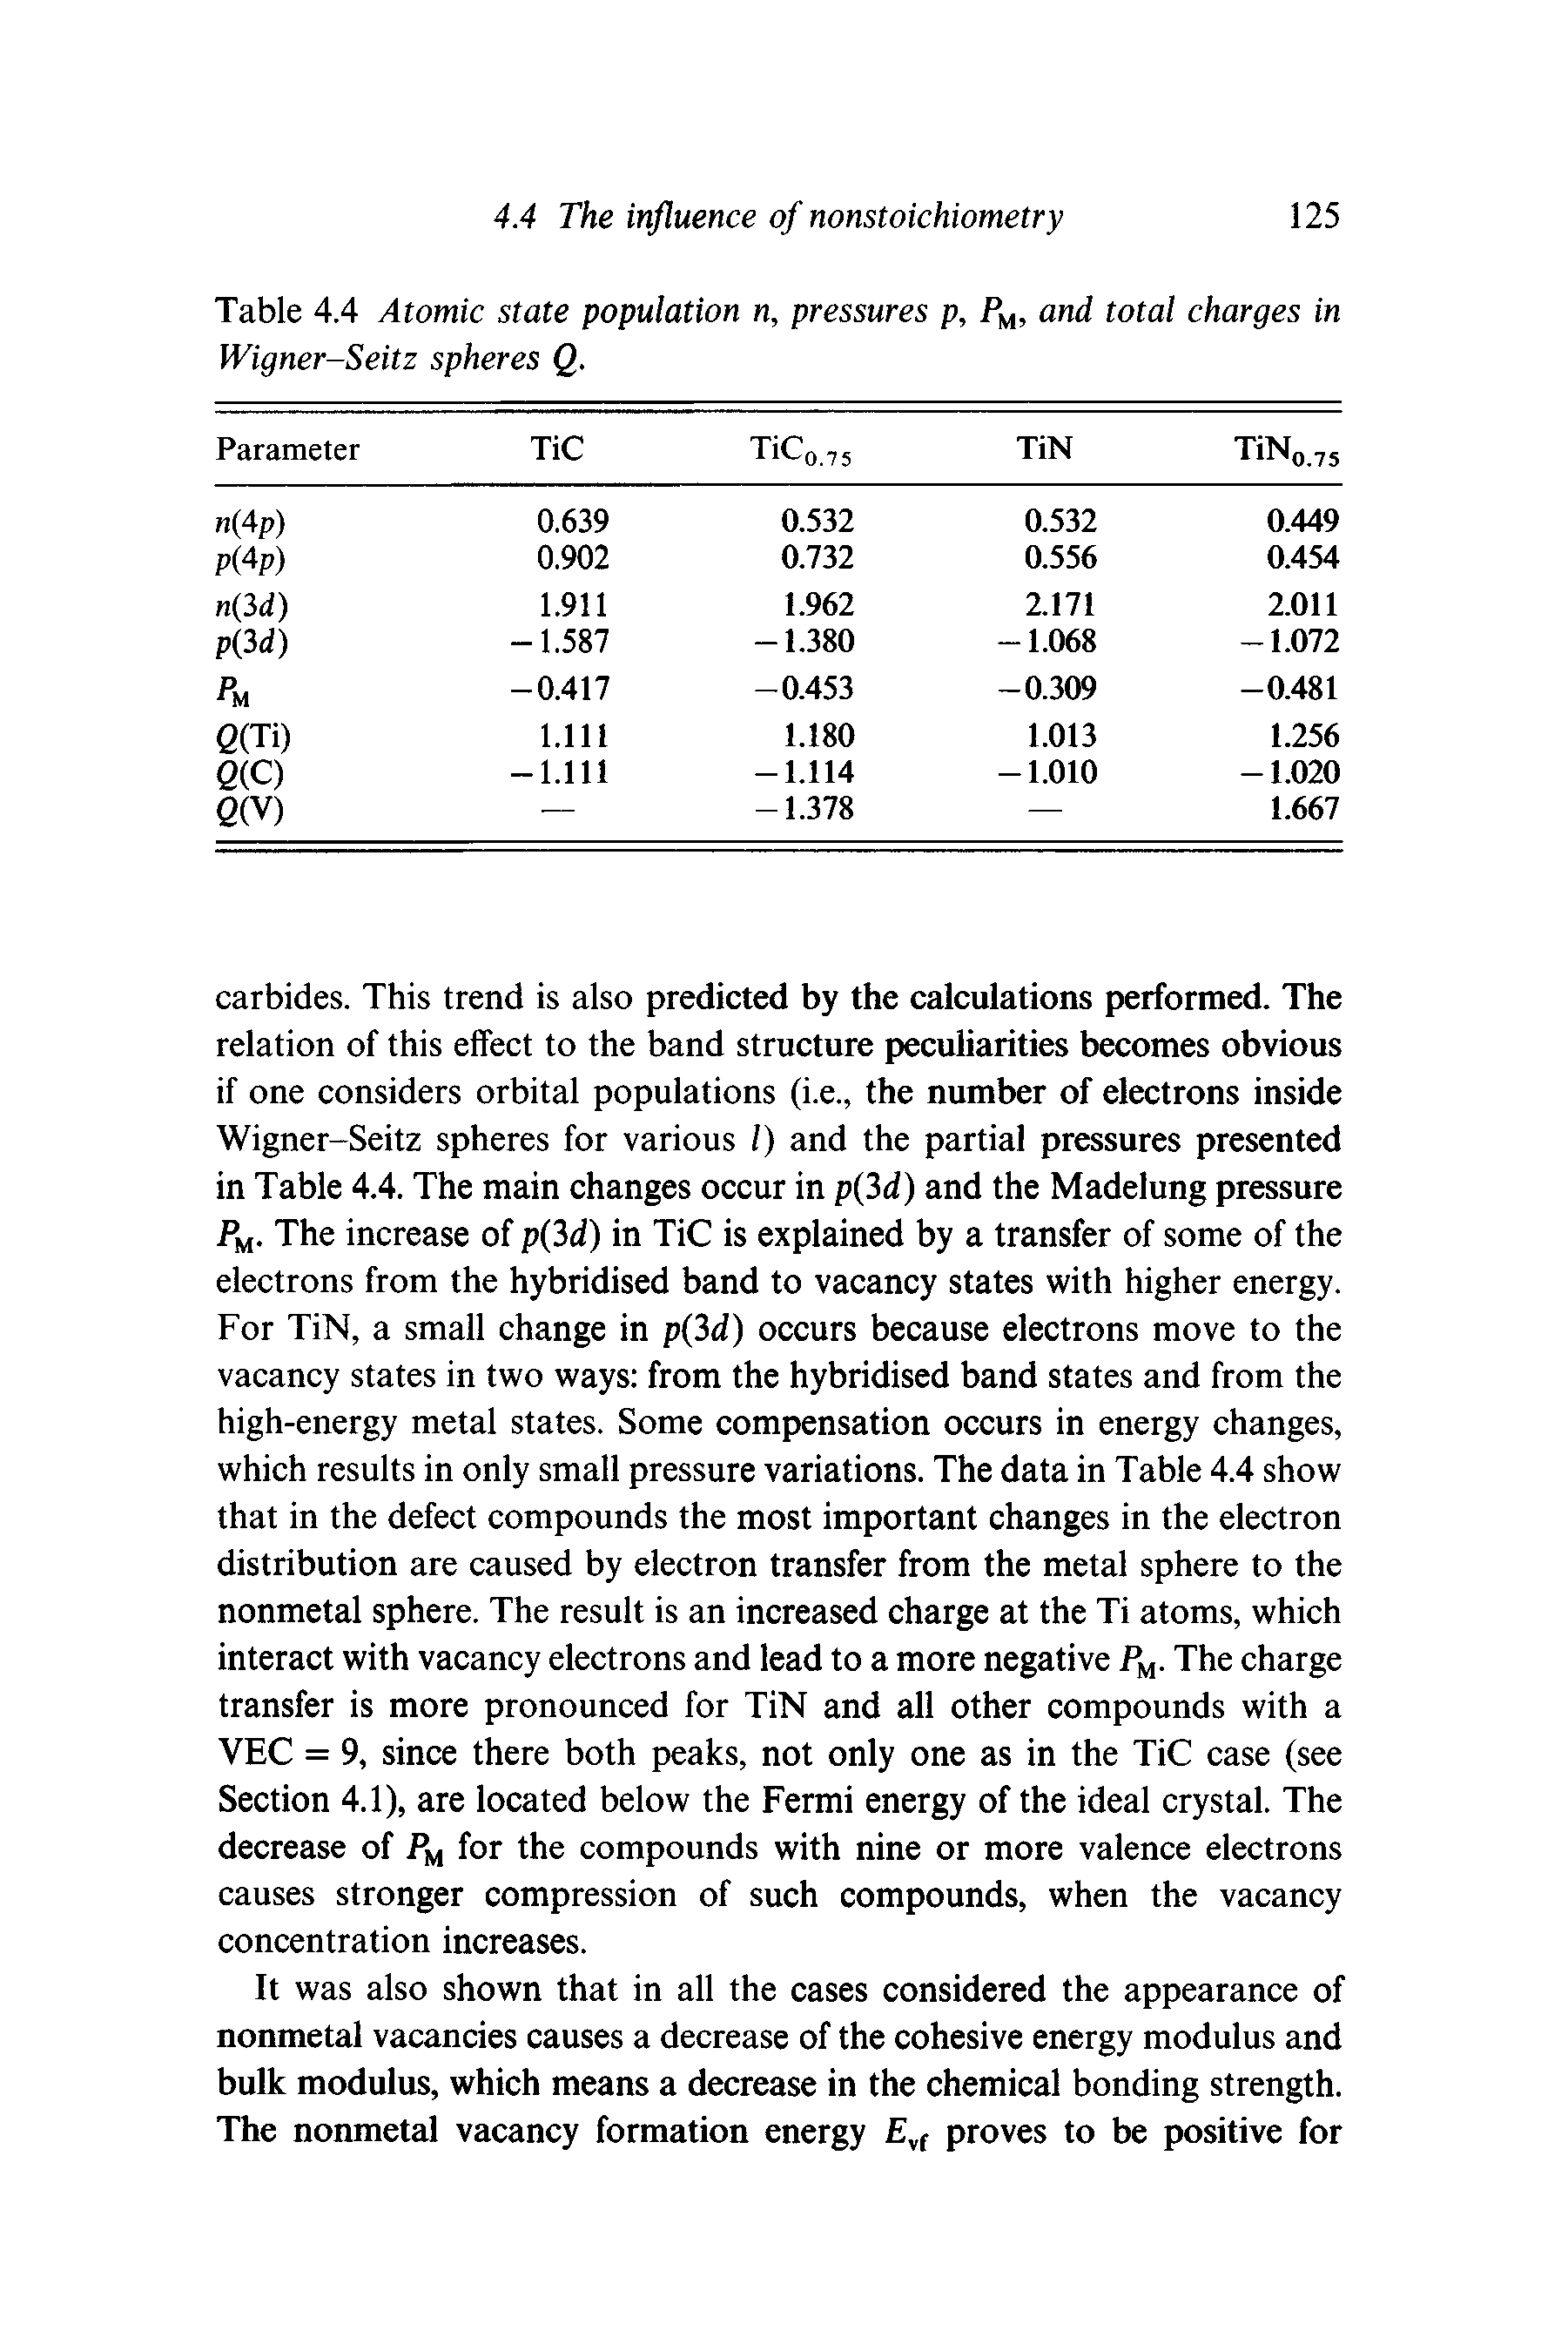 Table 4.4 Atomic state population n, pressures p, and total charges in Wigner-Seitz spheres Q.